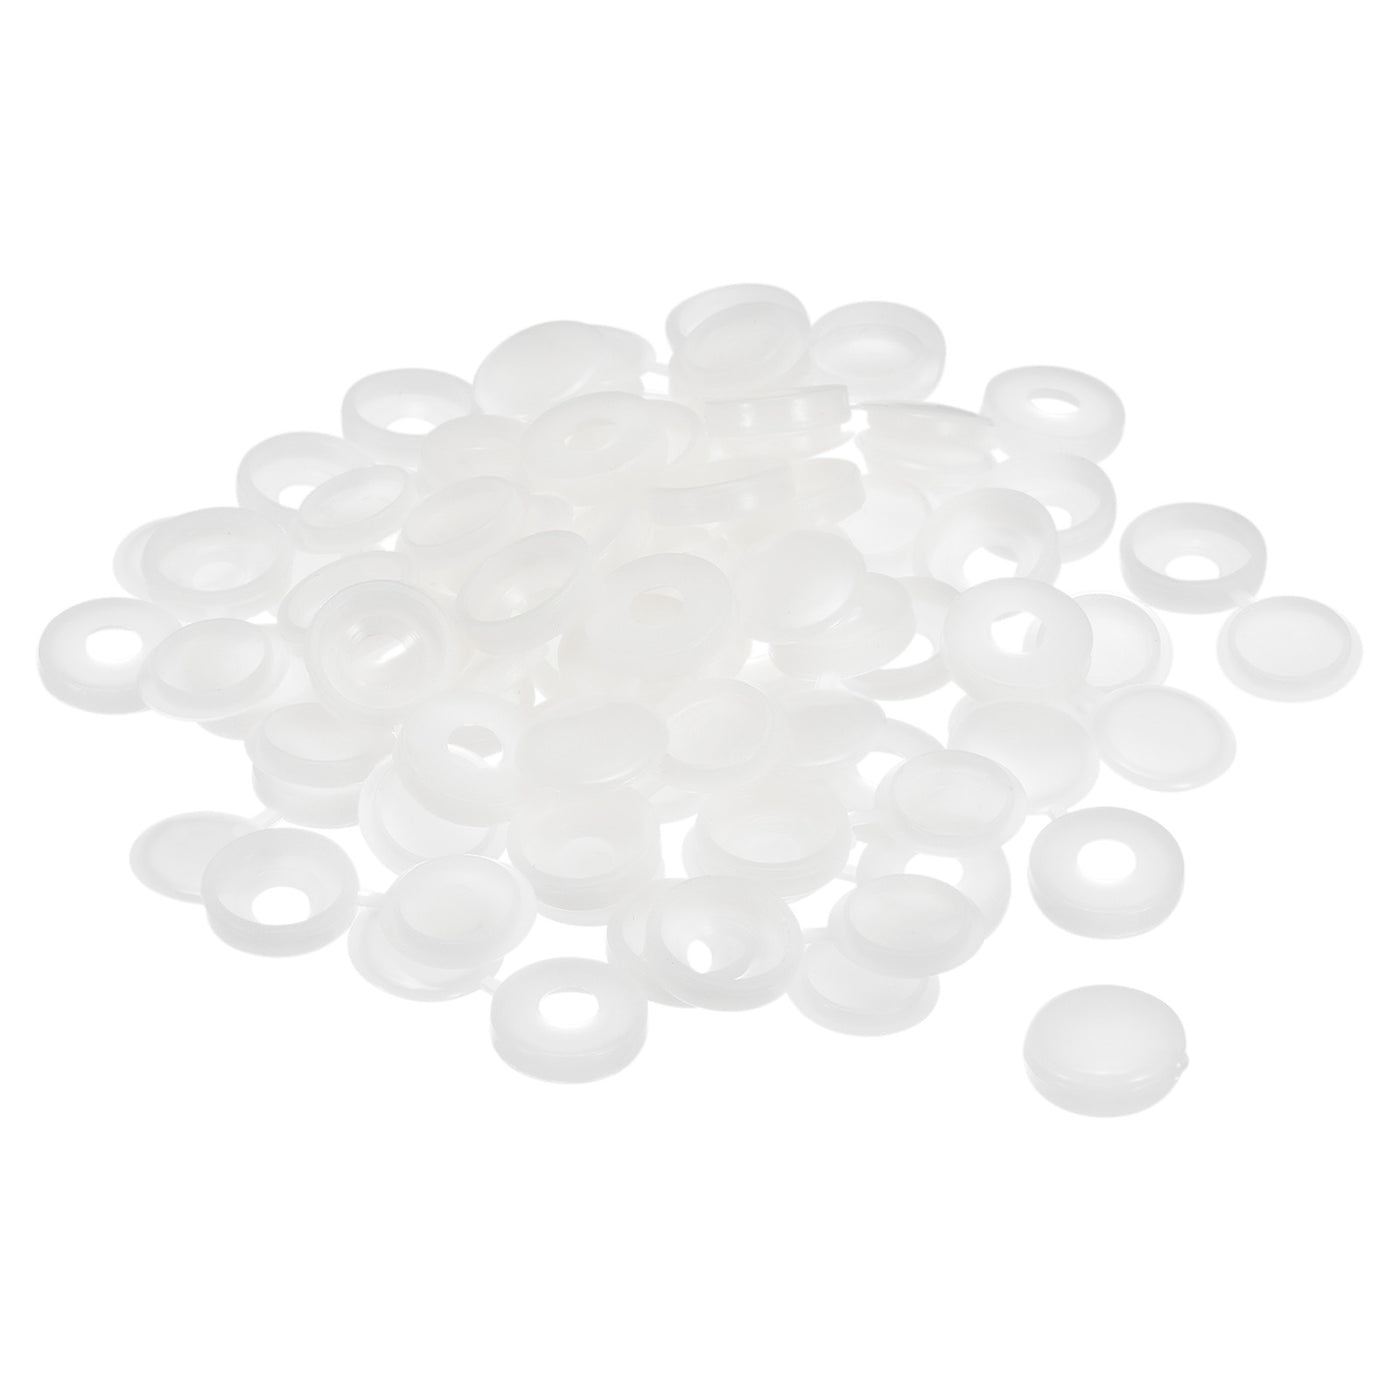 uxcell Uxcell 150Pcs 5mm Hinged Screw Cover Caps Plastic Fold Screw Snap Covers, White